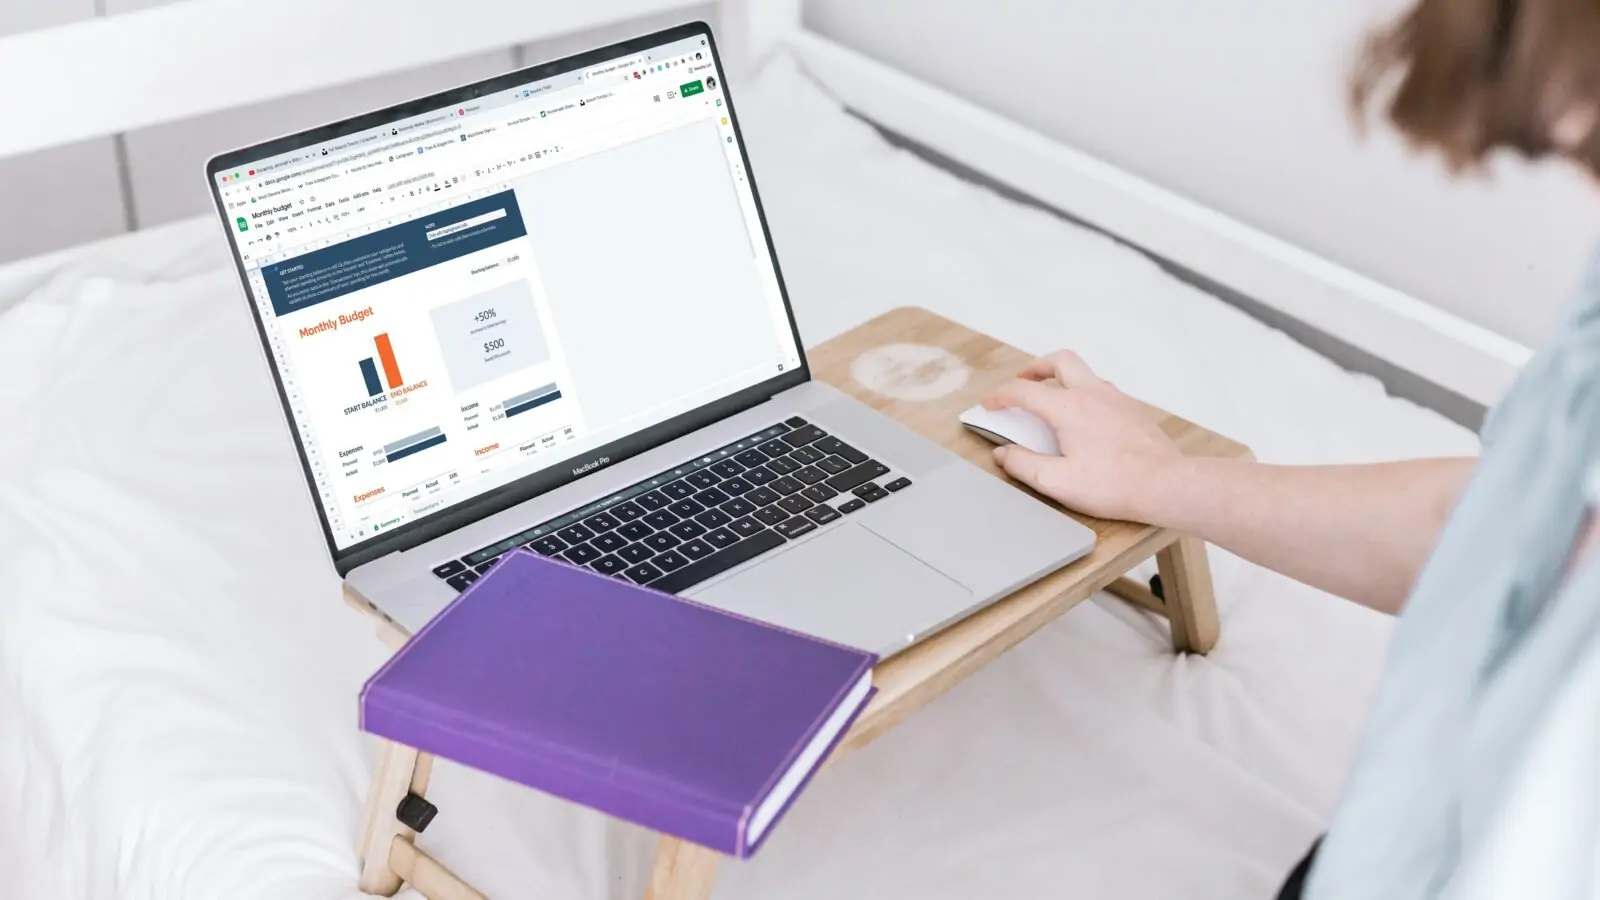 CRMs for nonprofits tie donor management, fundraising, email marketing, and events into a single all-in-one platform. In this image, a woman uses her laptop to run a report on her organization's monthly budget.